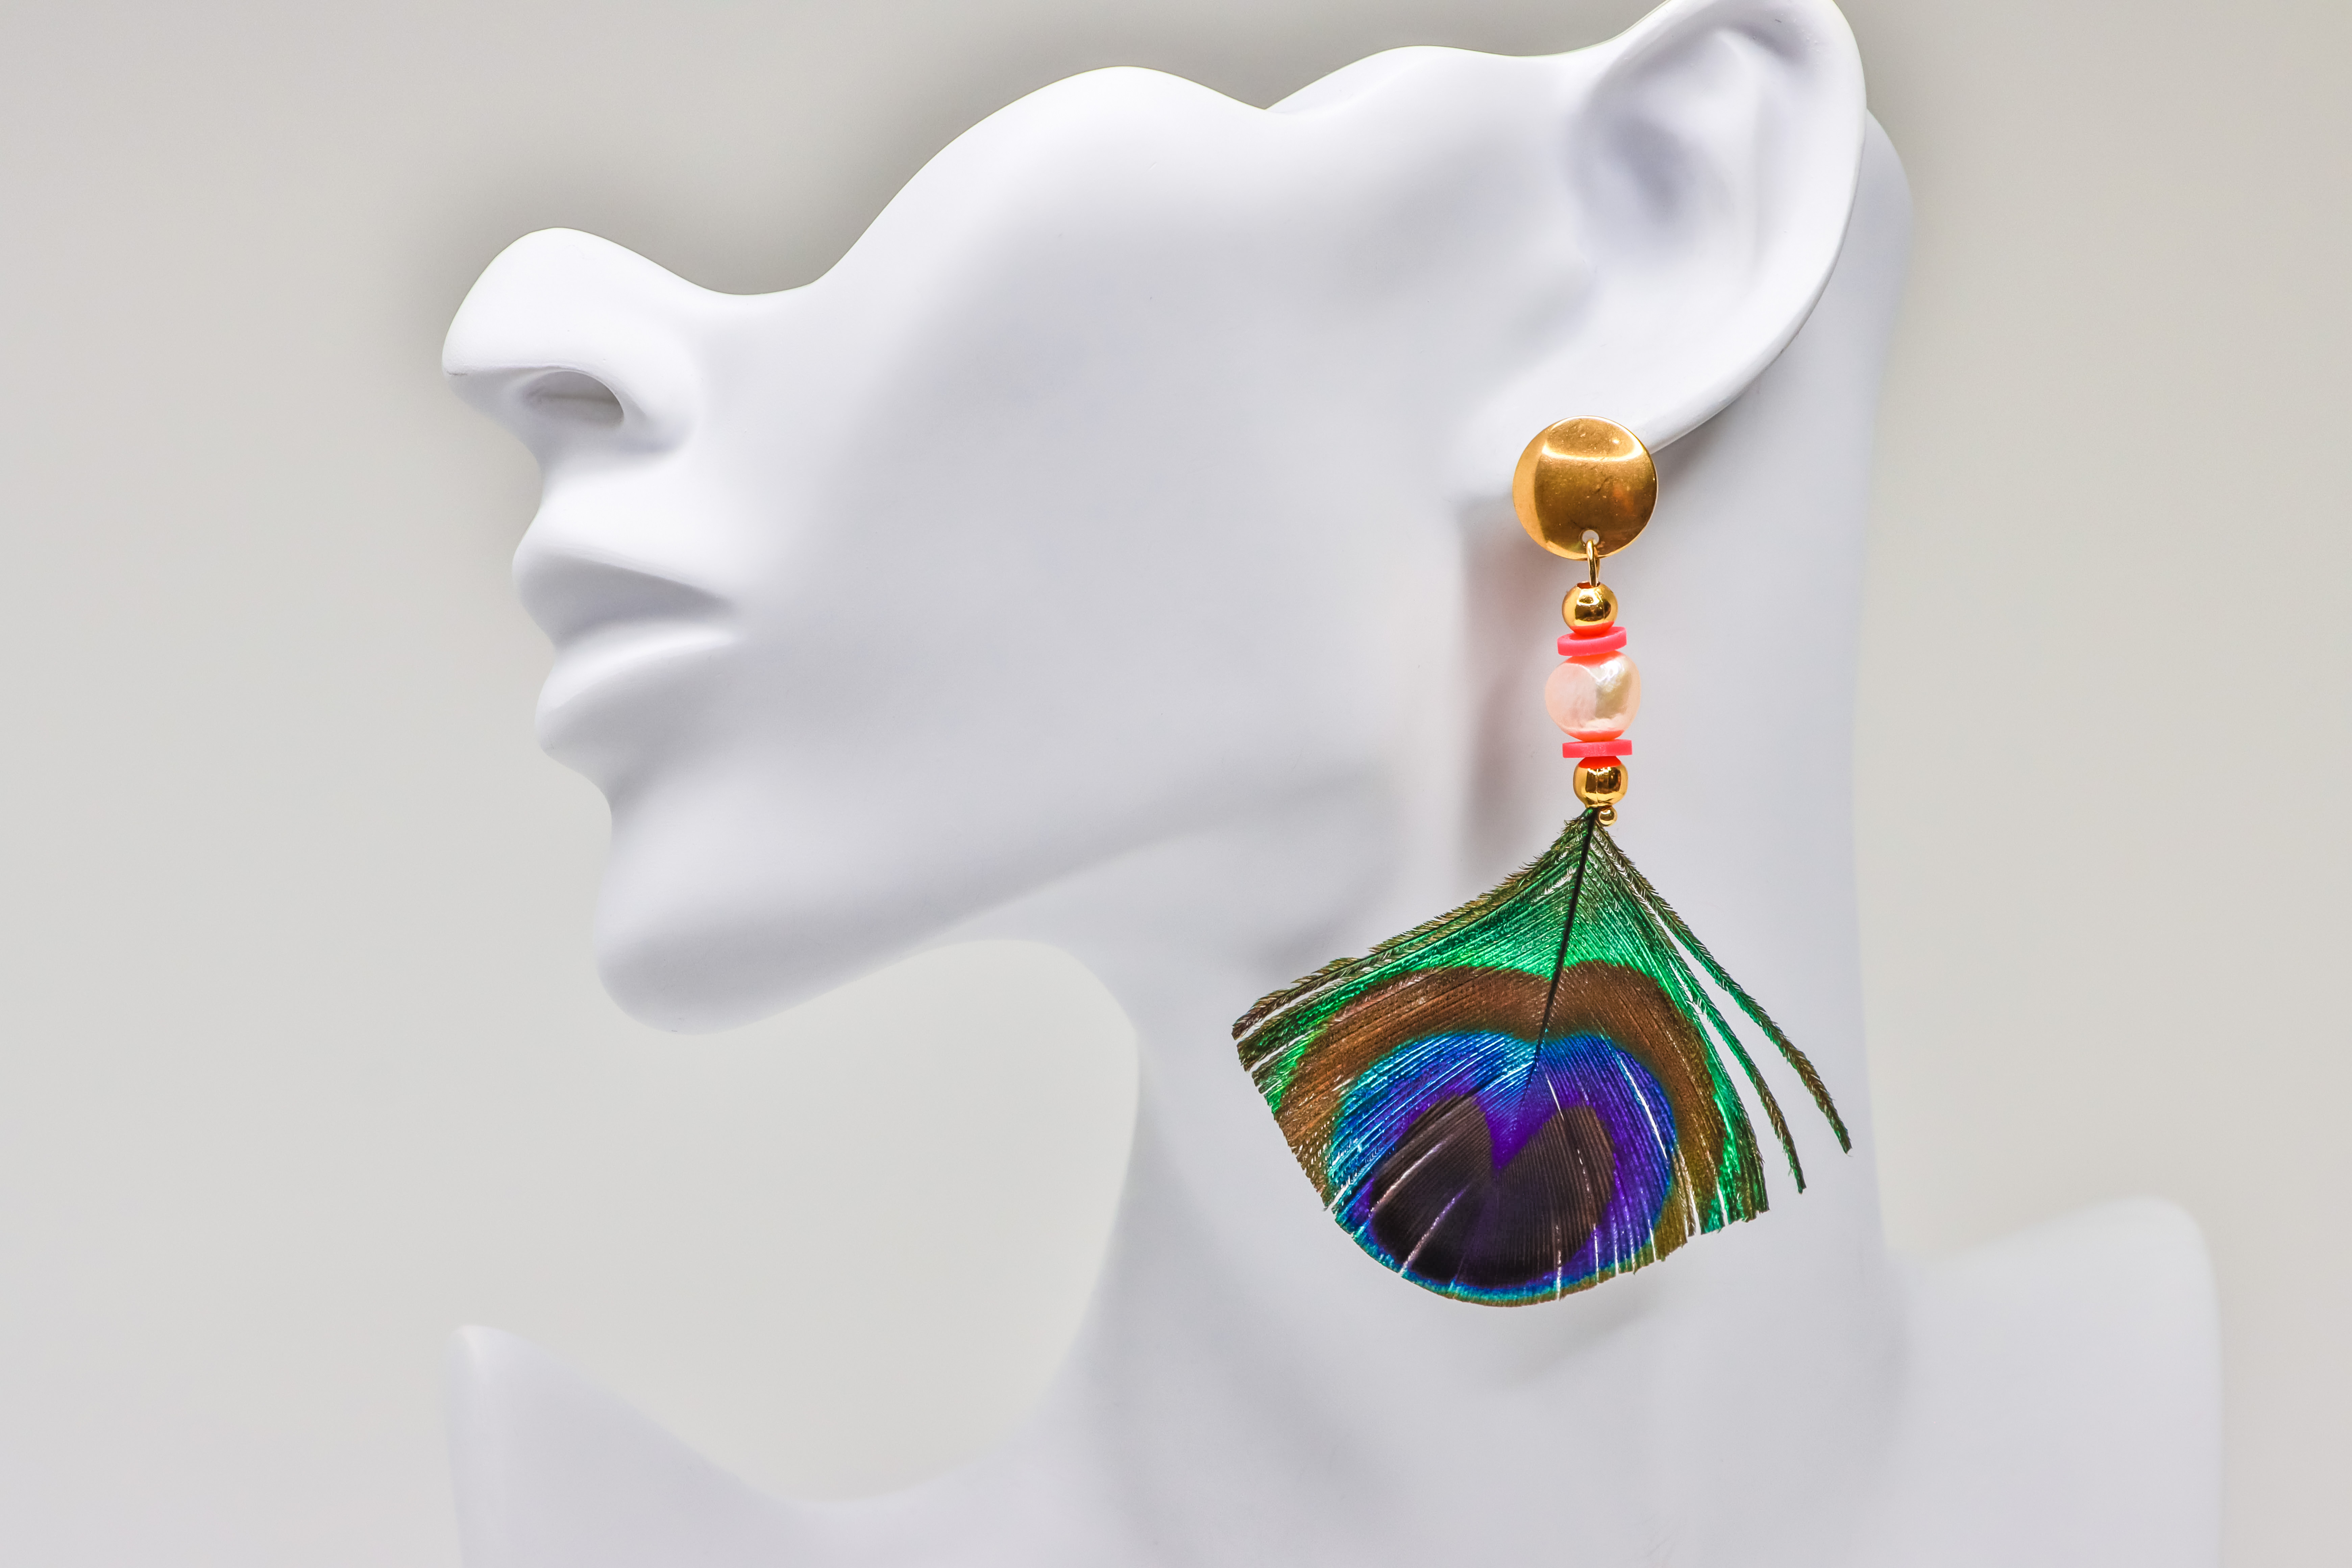 Gold Earrings - Peacock and Gold Collection 2